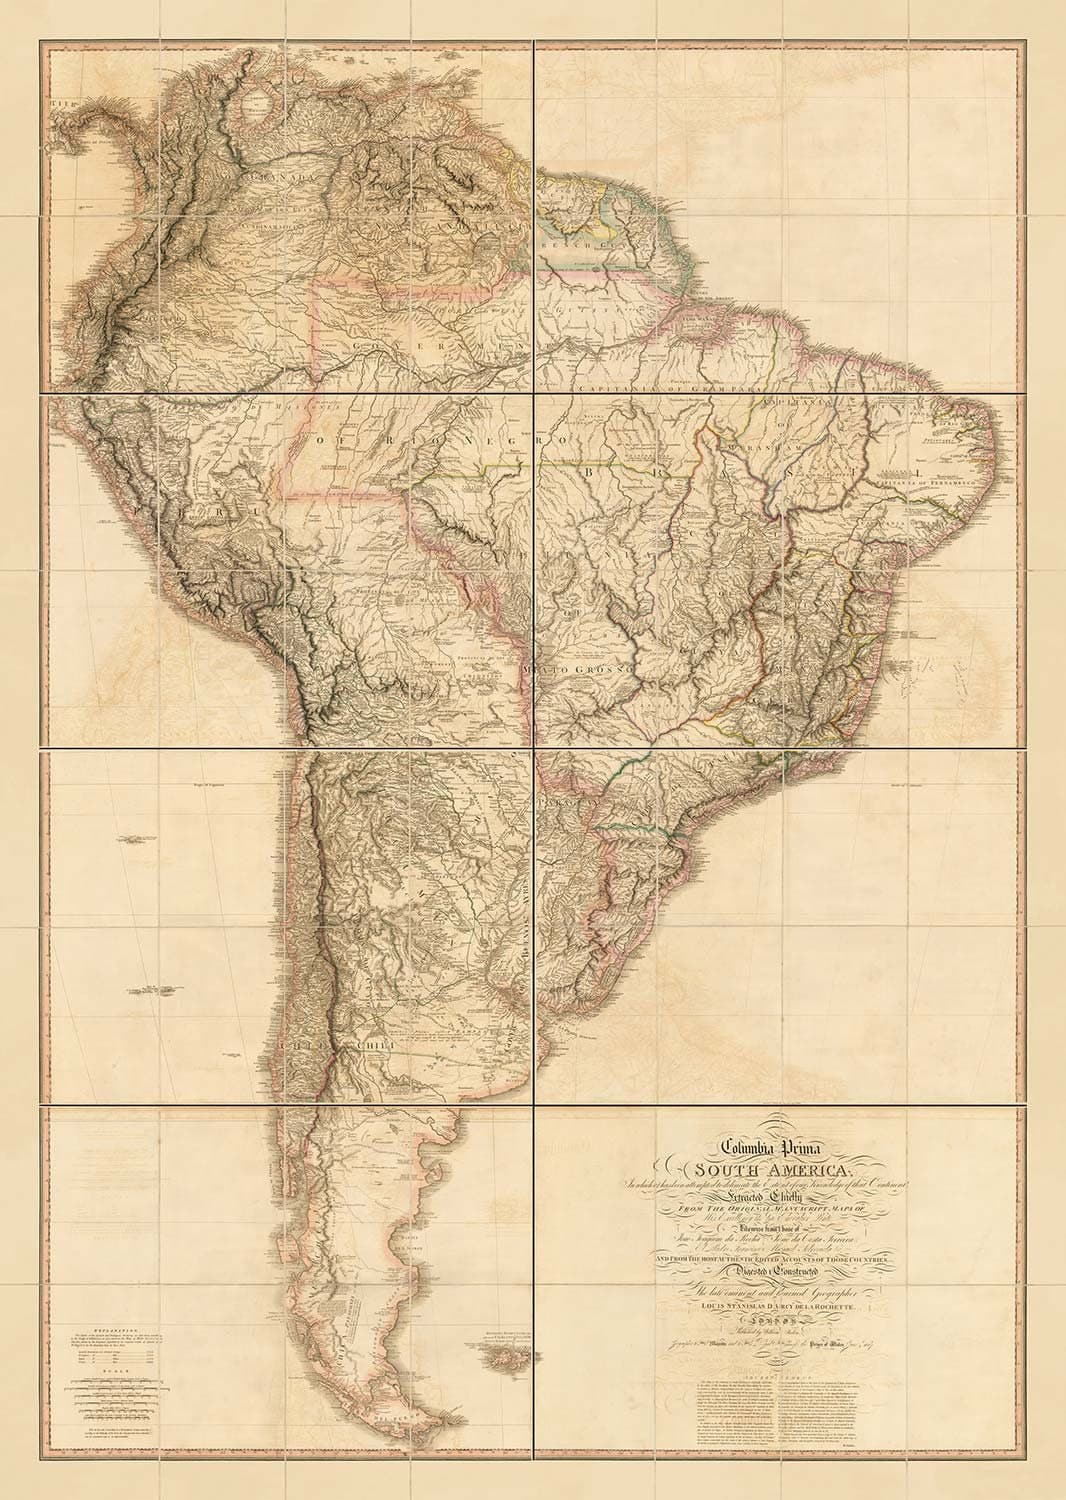 Rare Old Map of South America by Faden, 1807 - Spanish Colonialism - Brazil, Peru, Colombia, Chile, Venezuela, Amazon